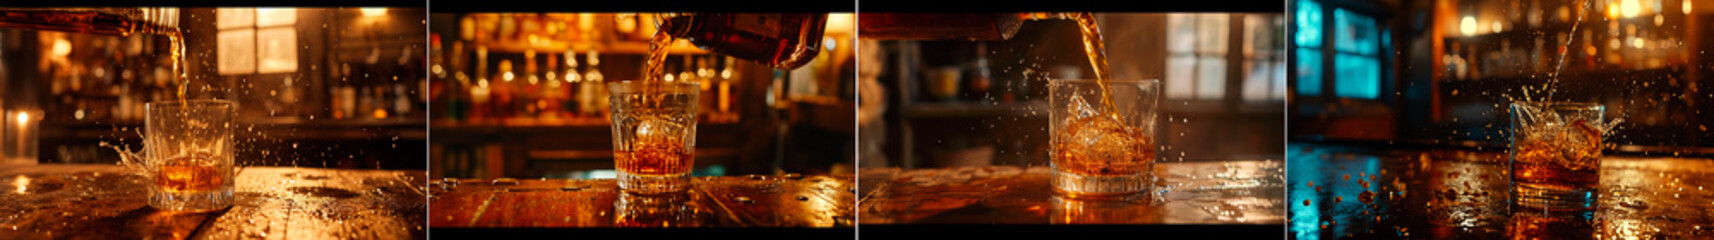 A wooden bar in an old town setting creates a rustic and nostalgic atmosphere. A detailed close-up shot captures the elegance of the whiskey being poured into the glass.